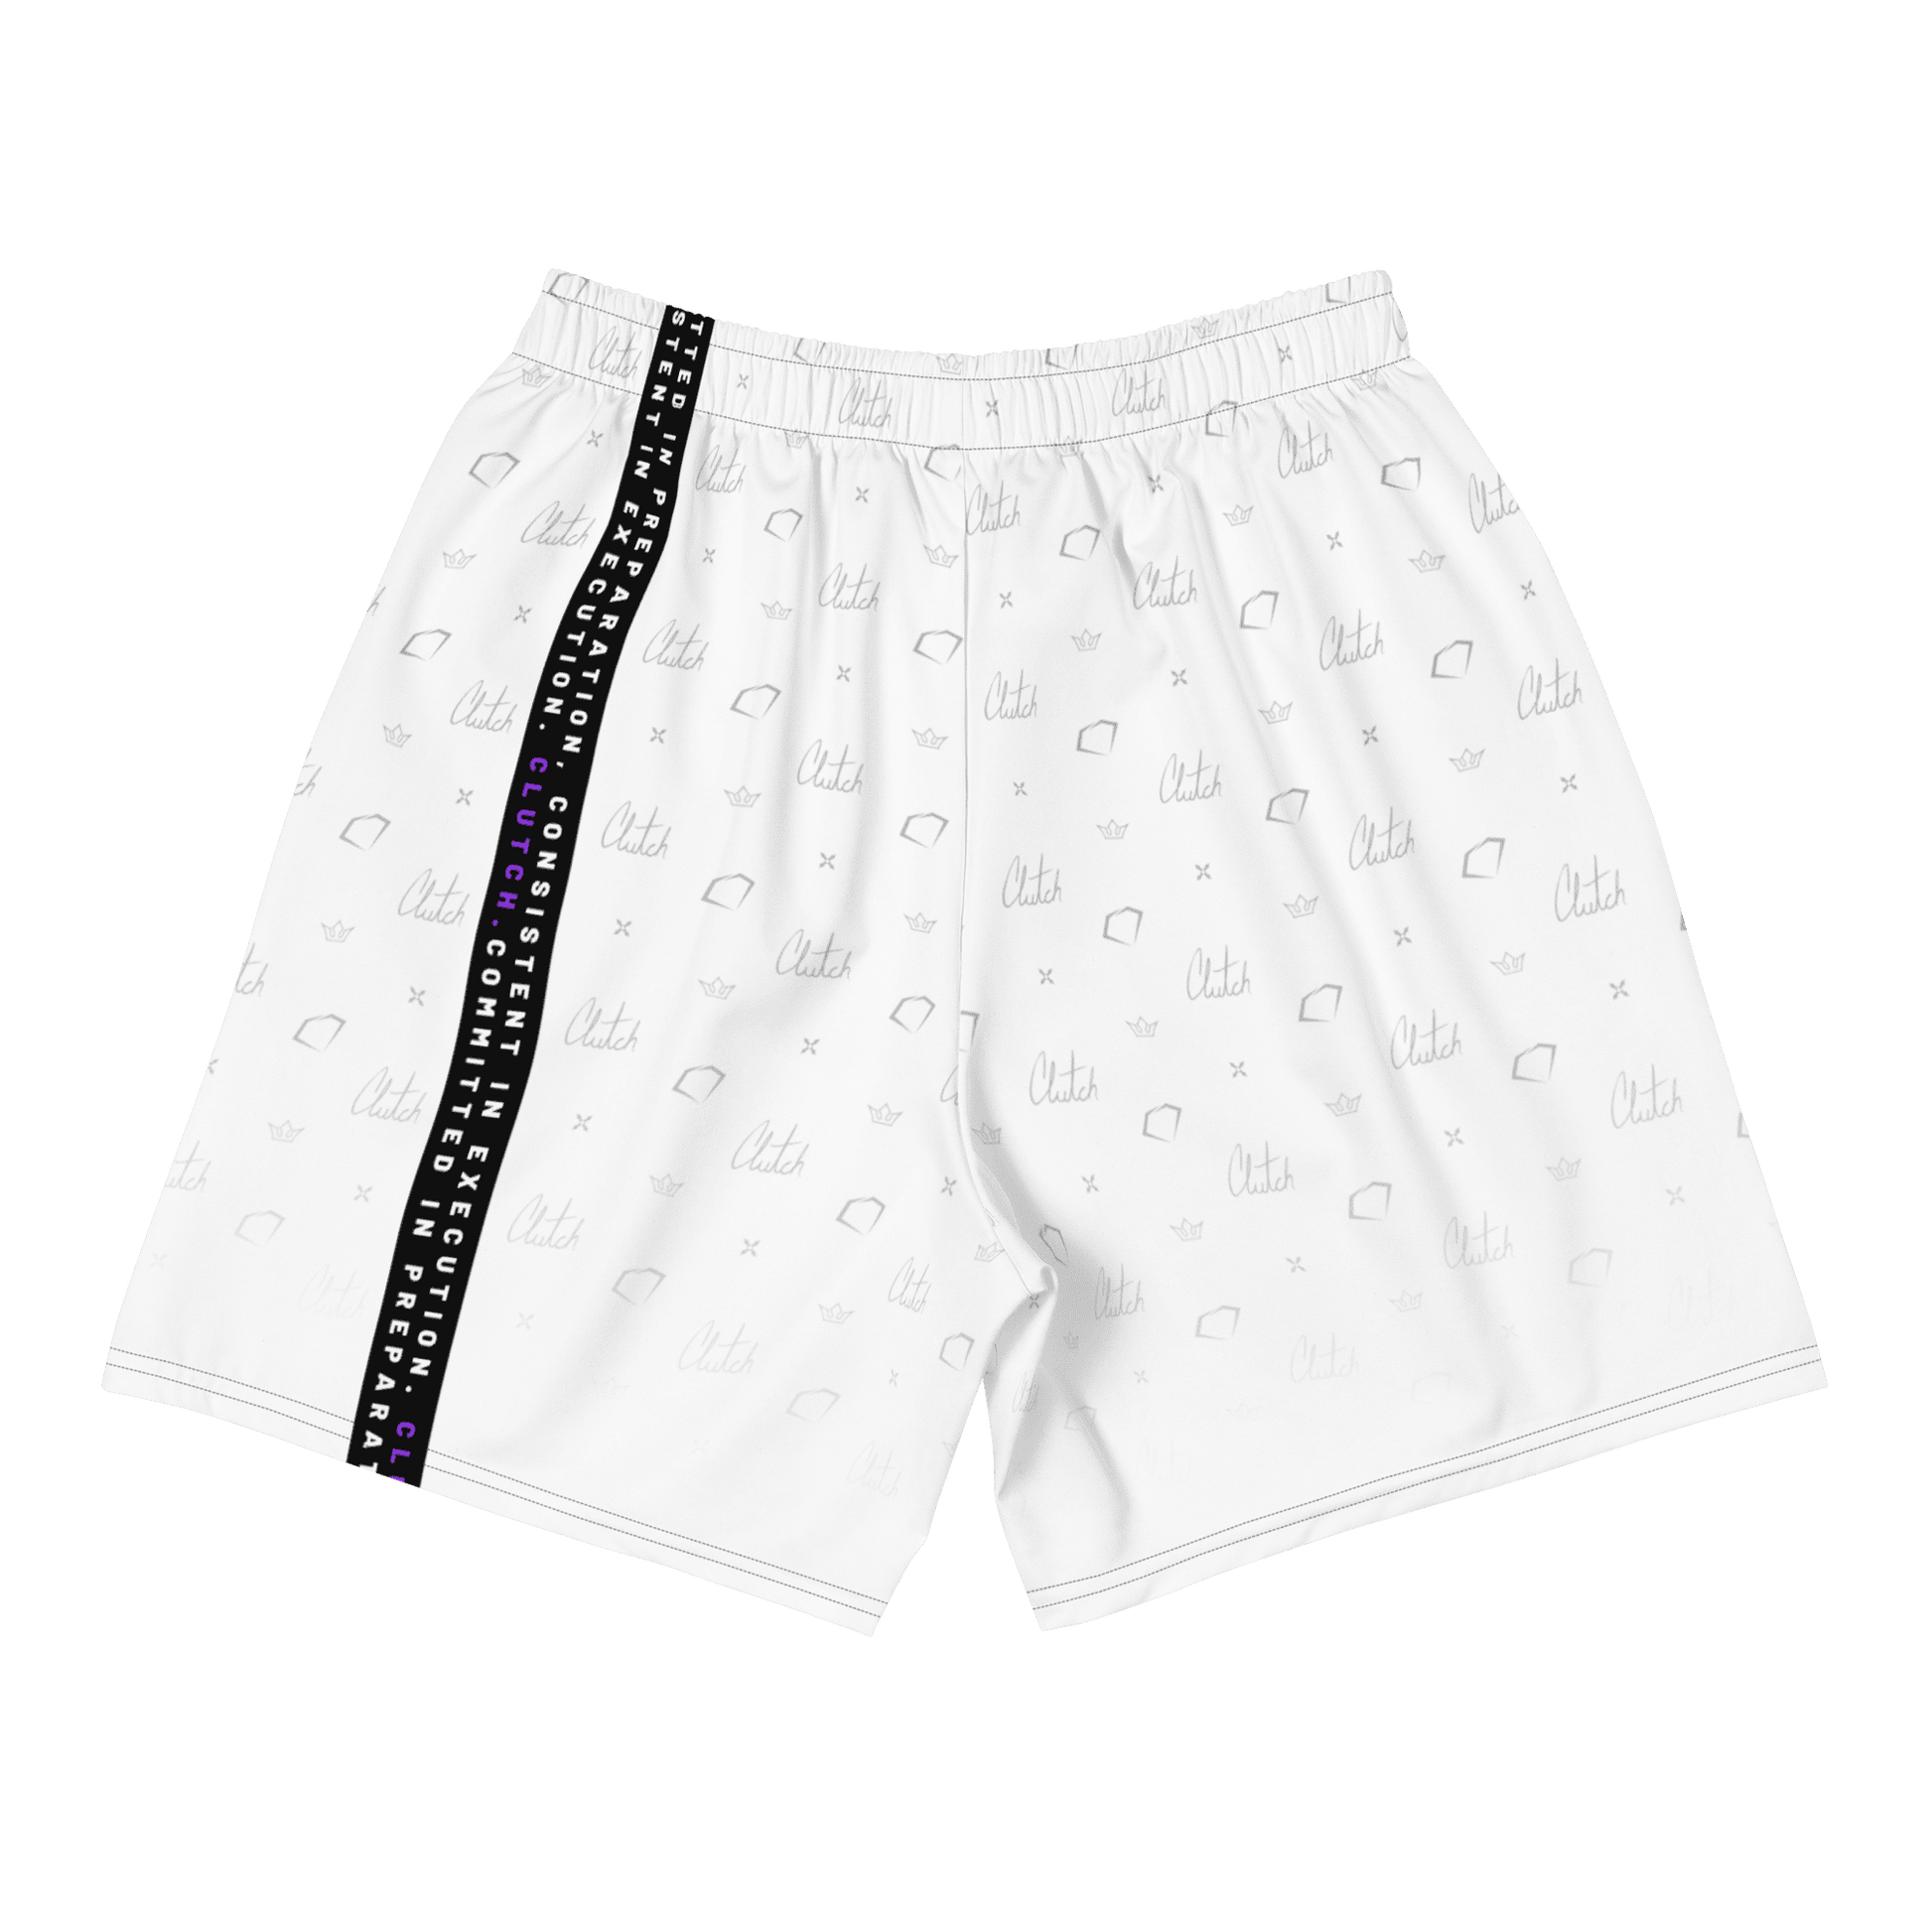 ICONIC | Men's Performance Shorts - White - Clutch -